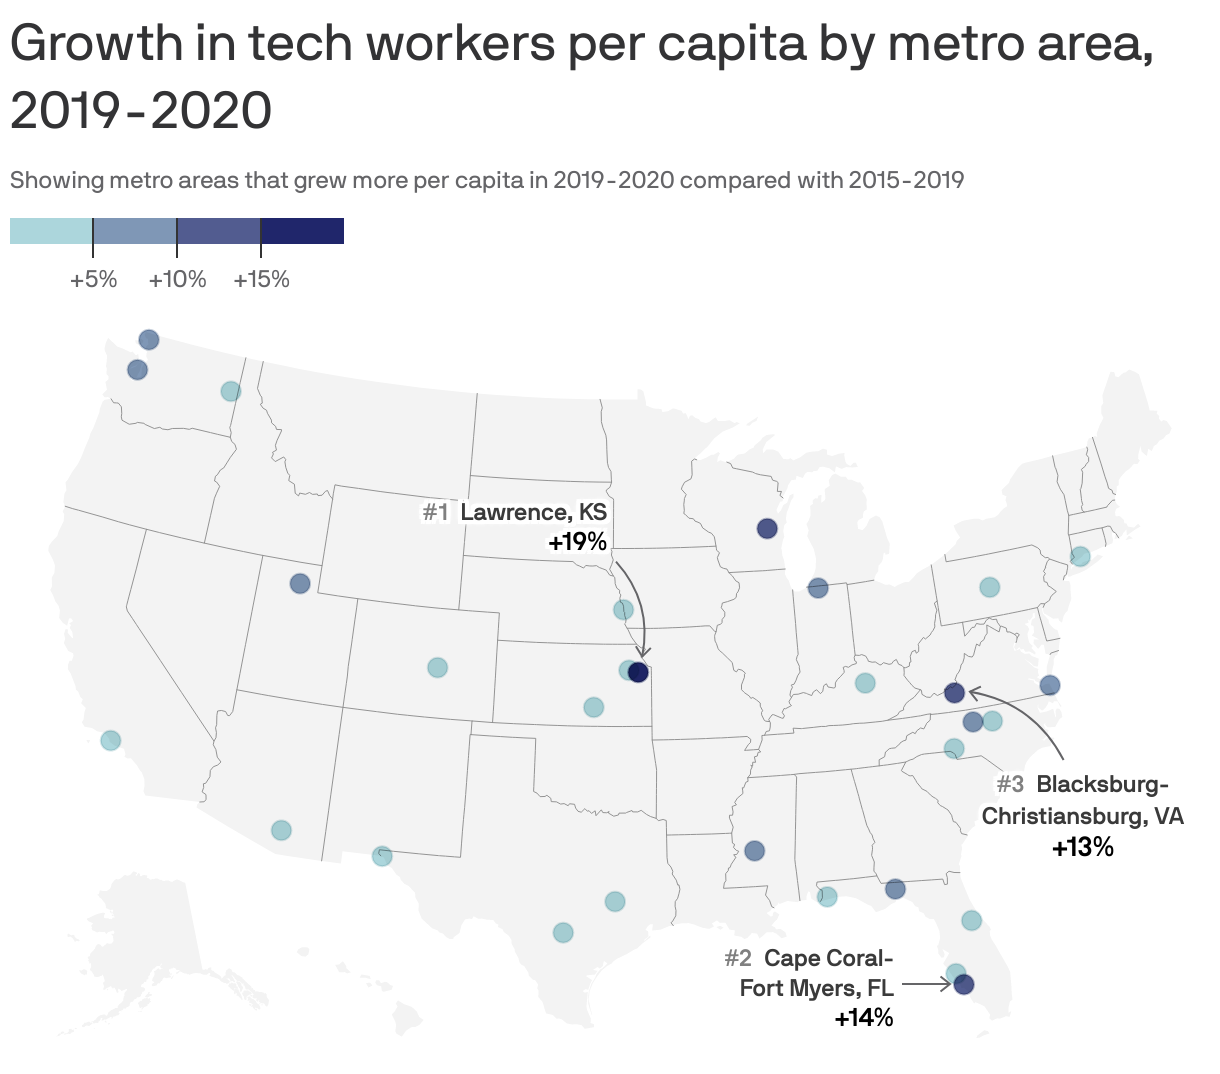 Growth in tech sector employment by metro area, 2019-2020